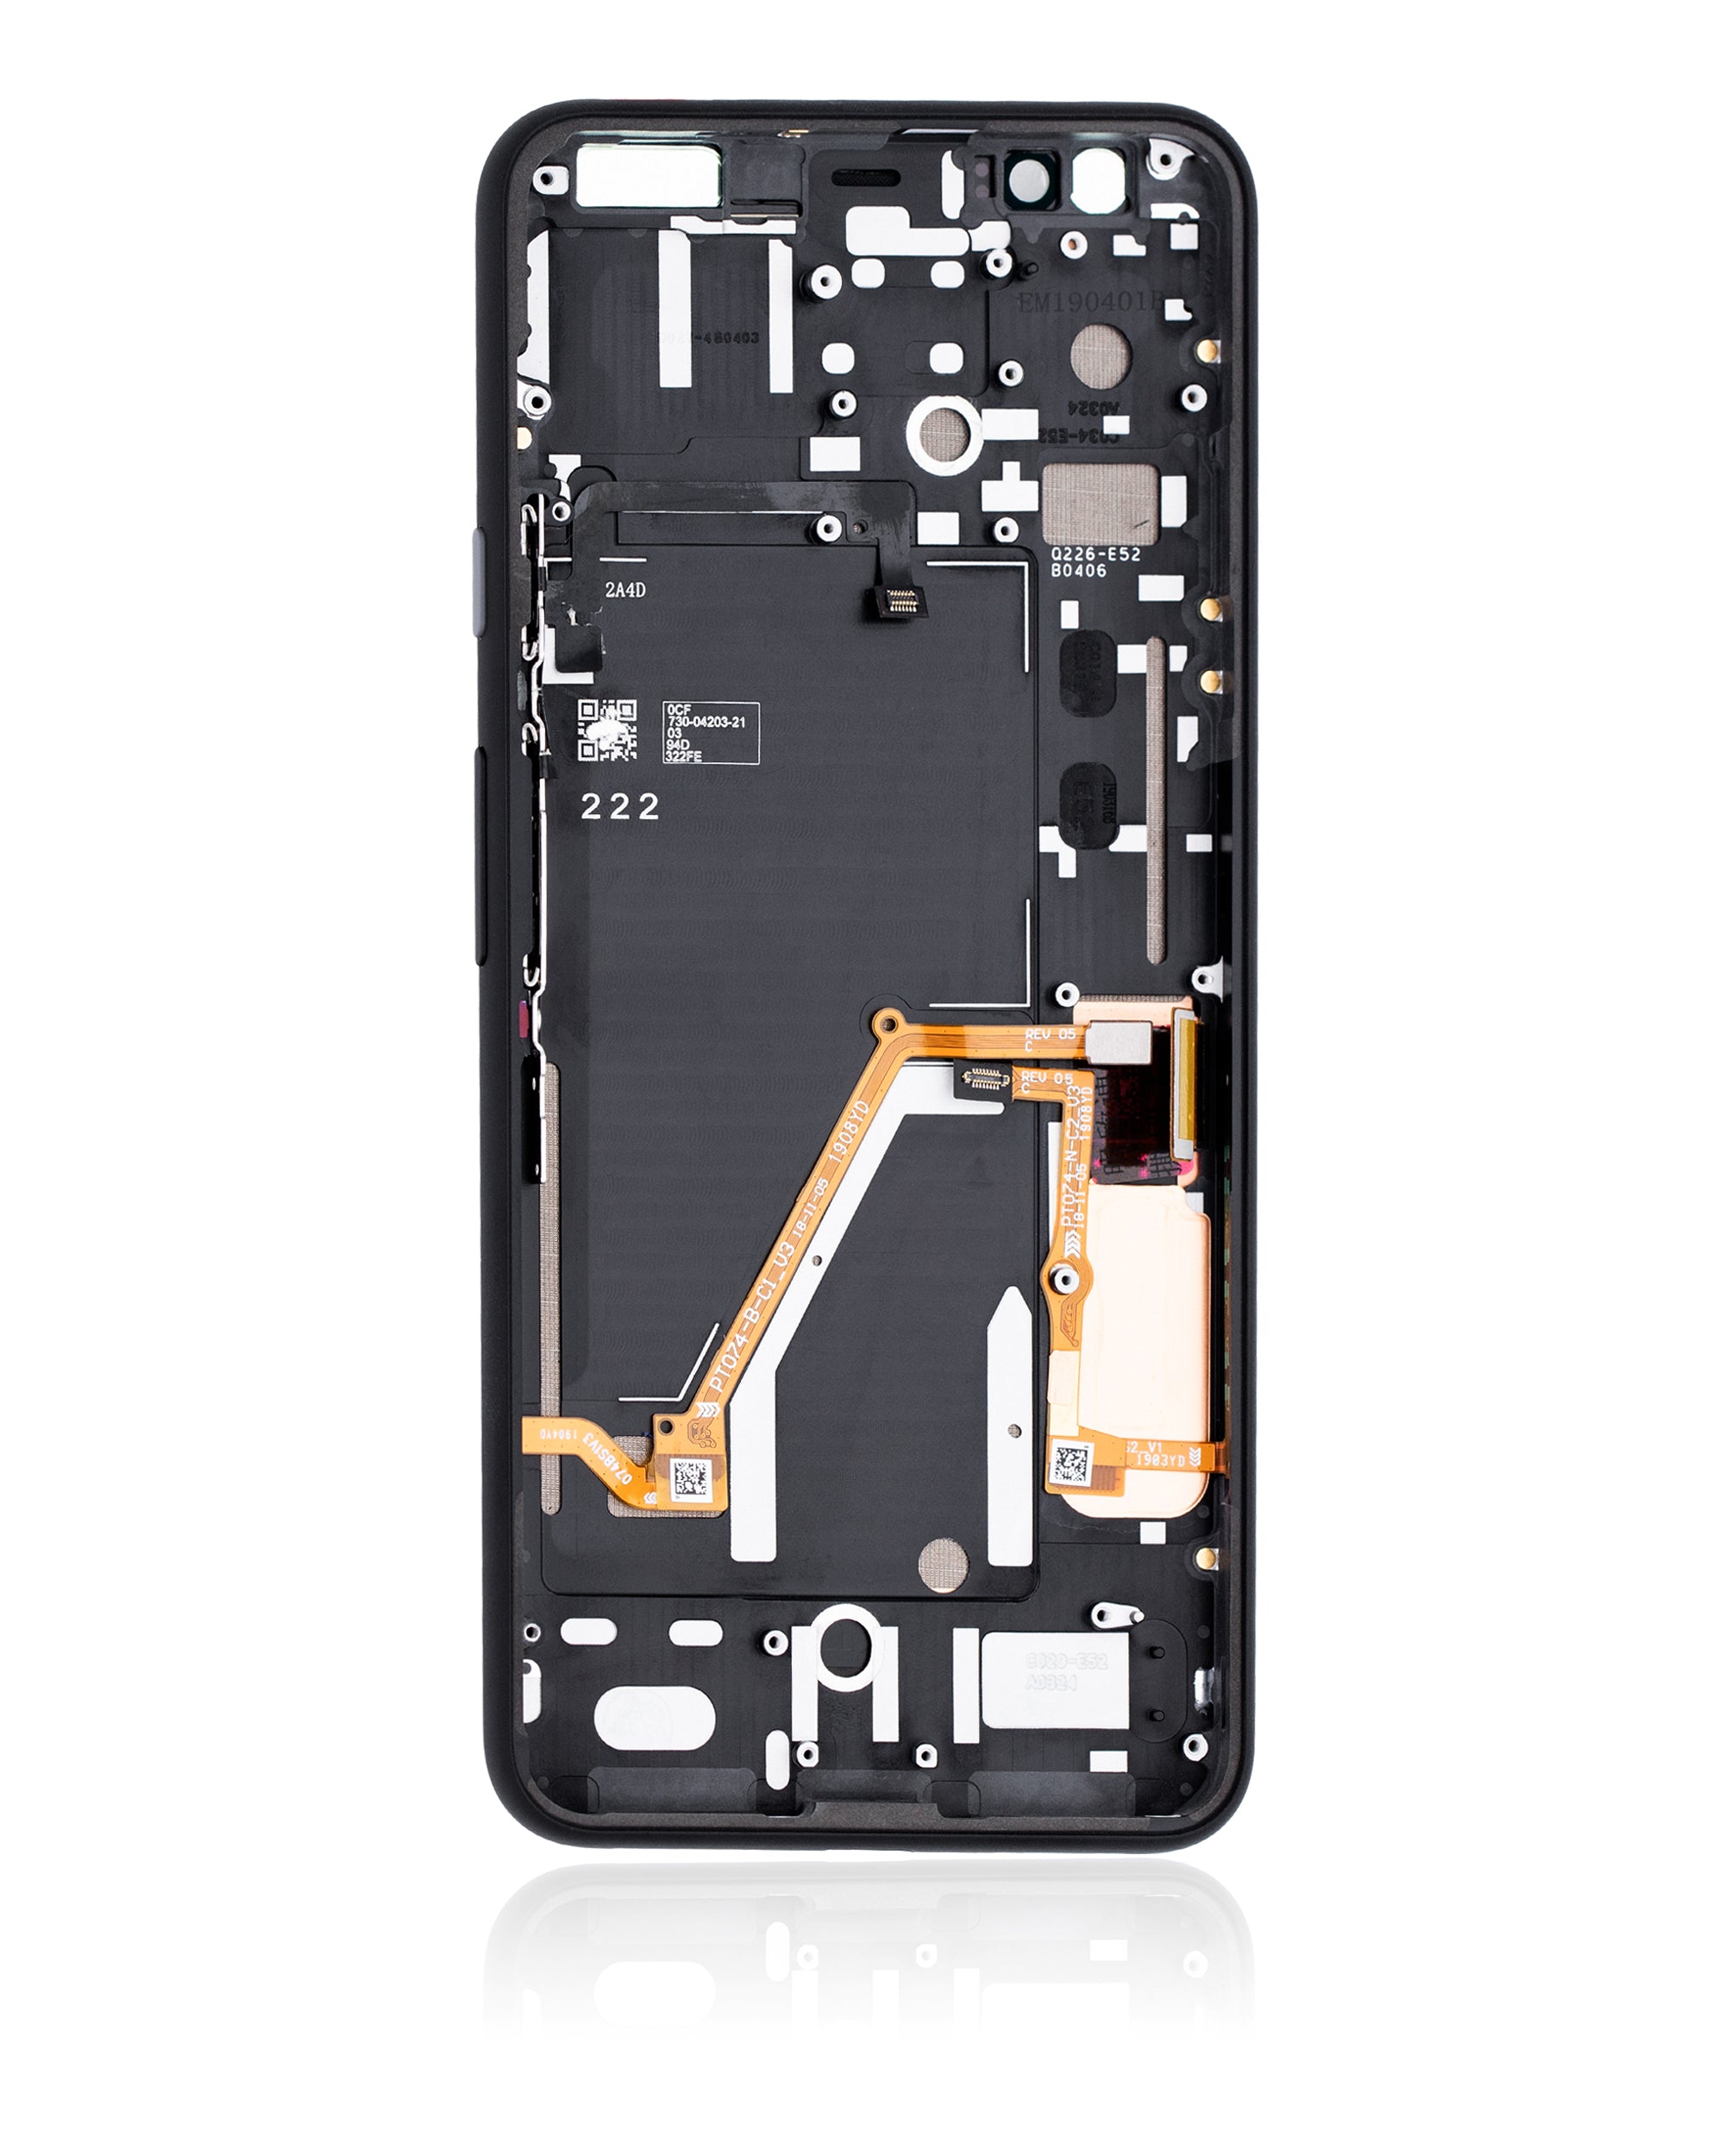 For Google Pixel 4 XL OLED Screen Replacement With Frame (Premium) (Gray)